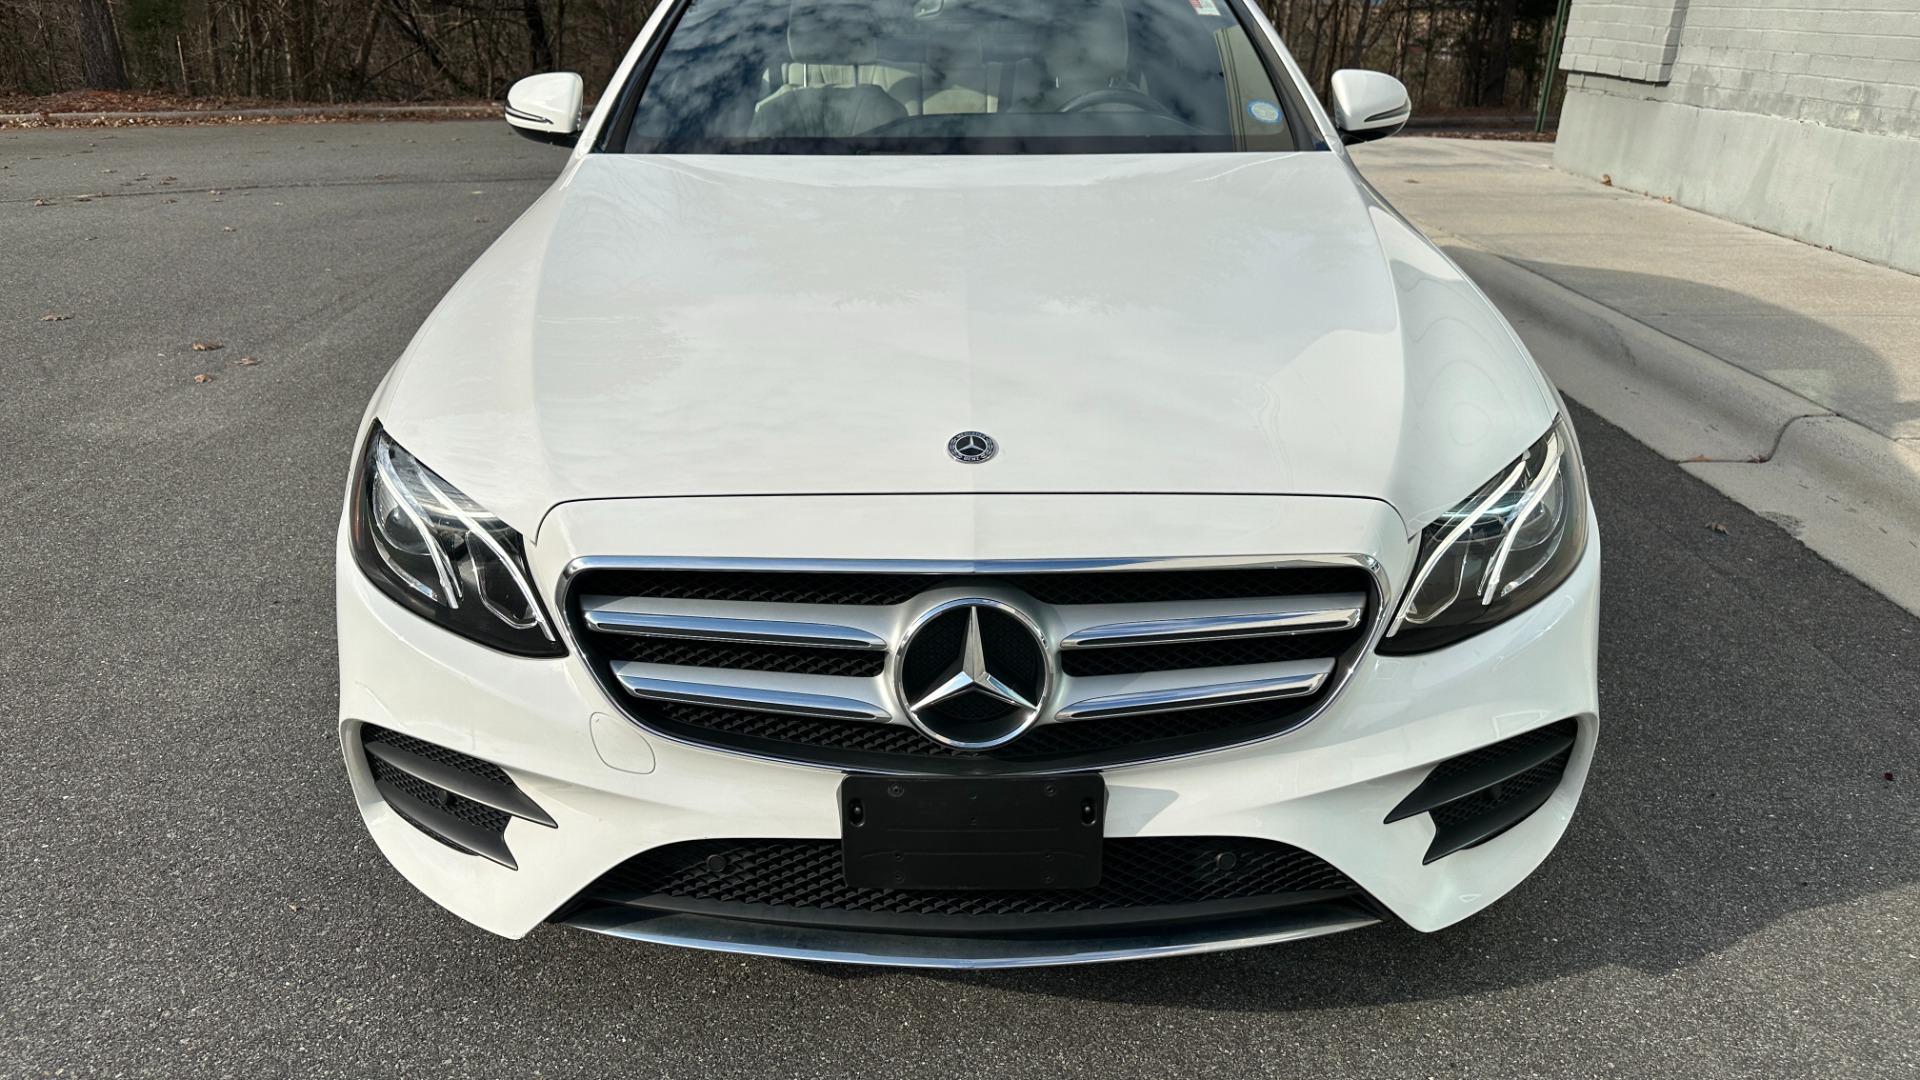 Used 2019 Mercedes-Benz E-Class E300 / PREMIUM PACKAGE / BLIND SPOT / BURMESTER SOUND / HEATED STEERING for sale $35,400 at Formula Imports in Charlotte NC 28227 8